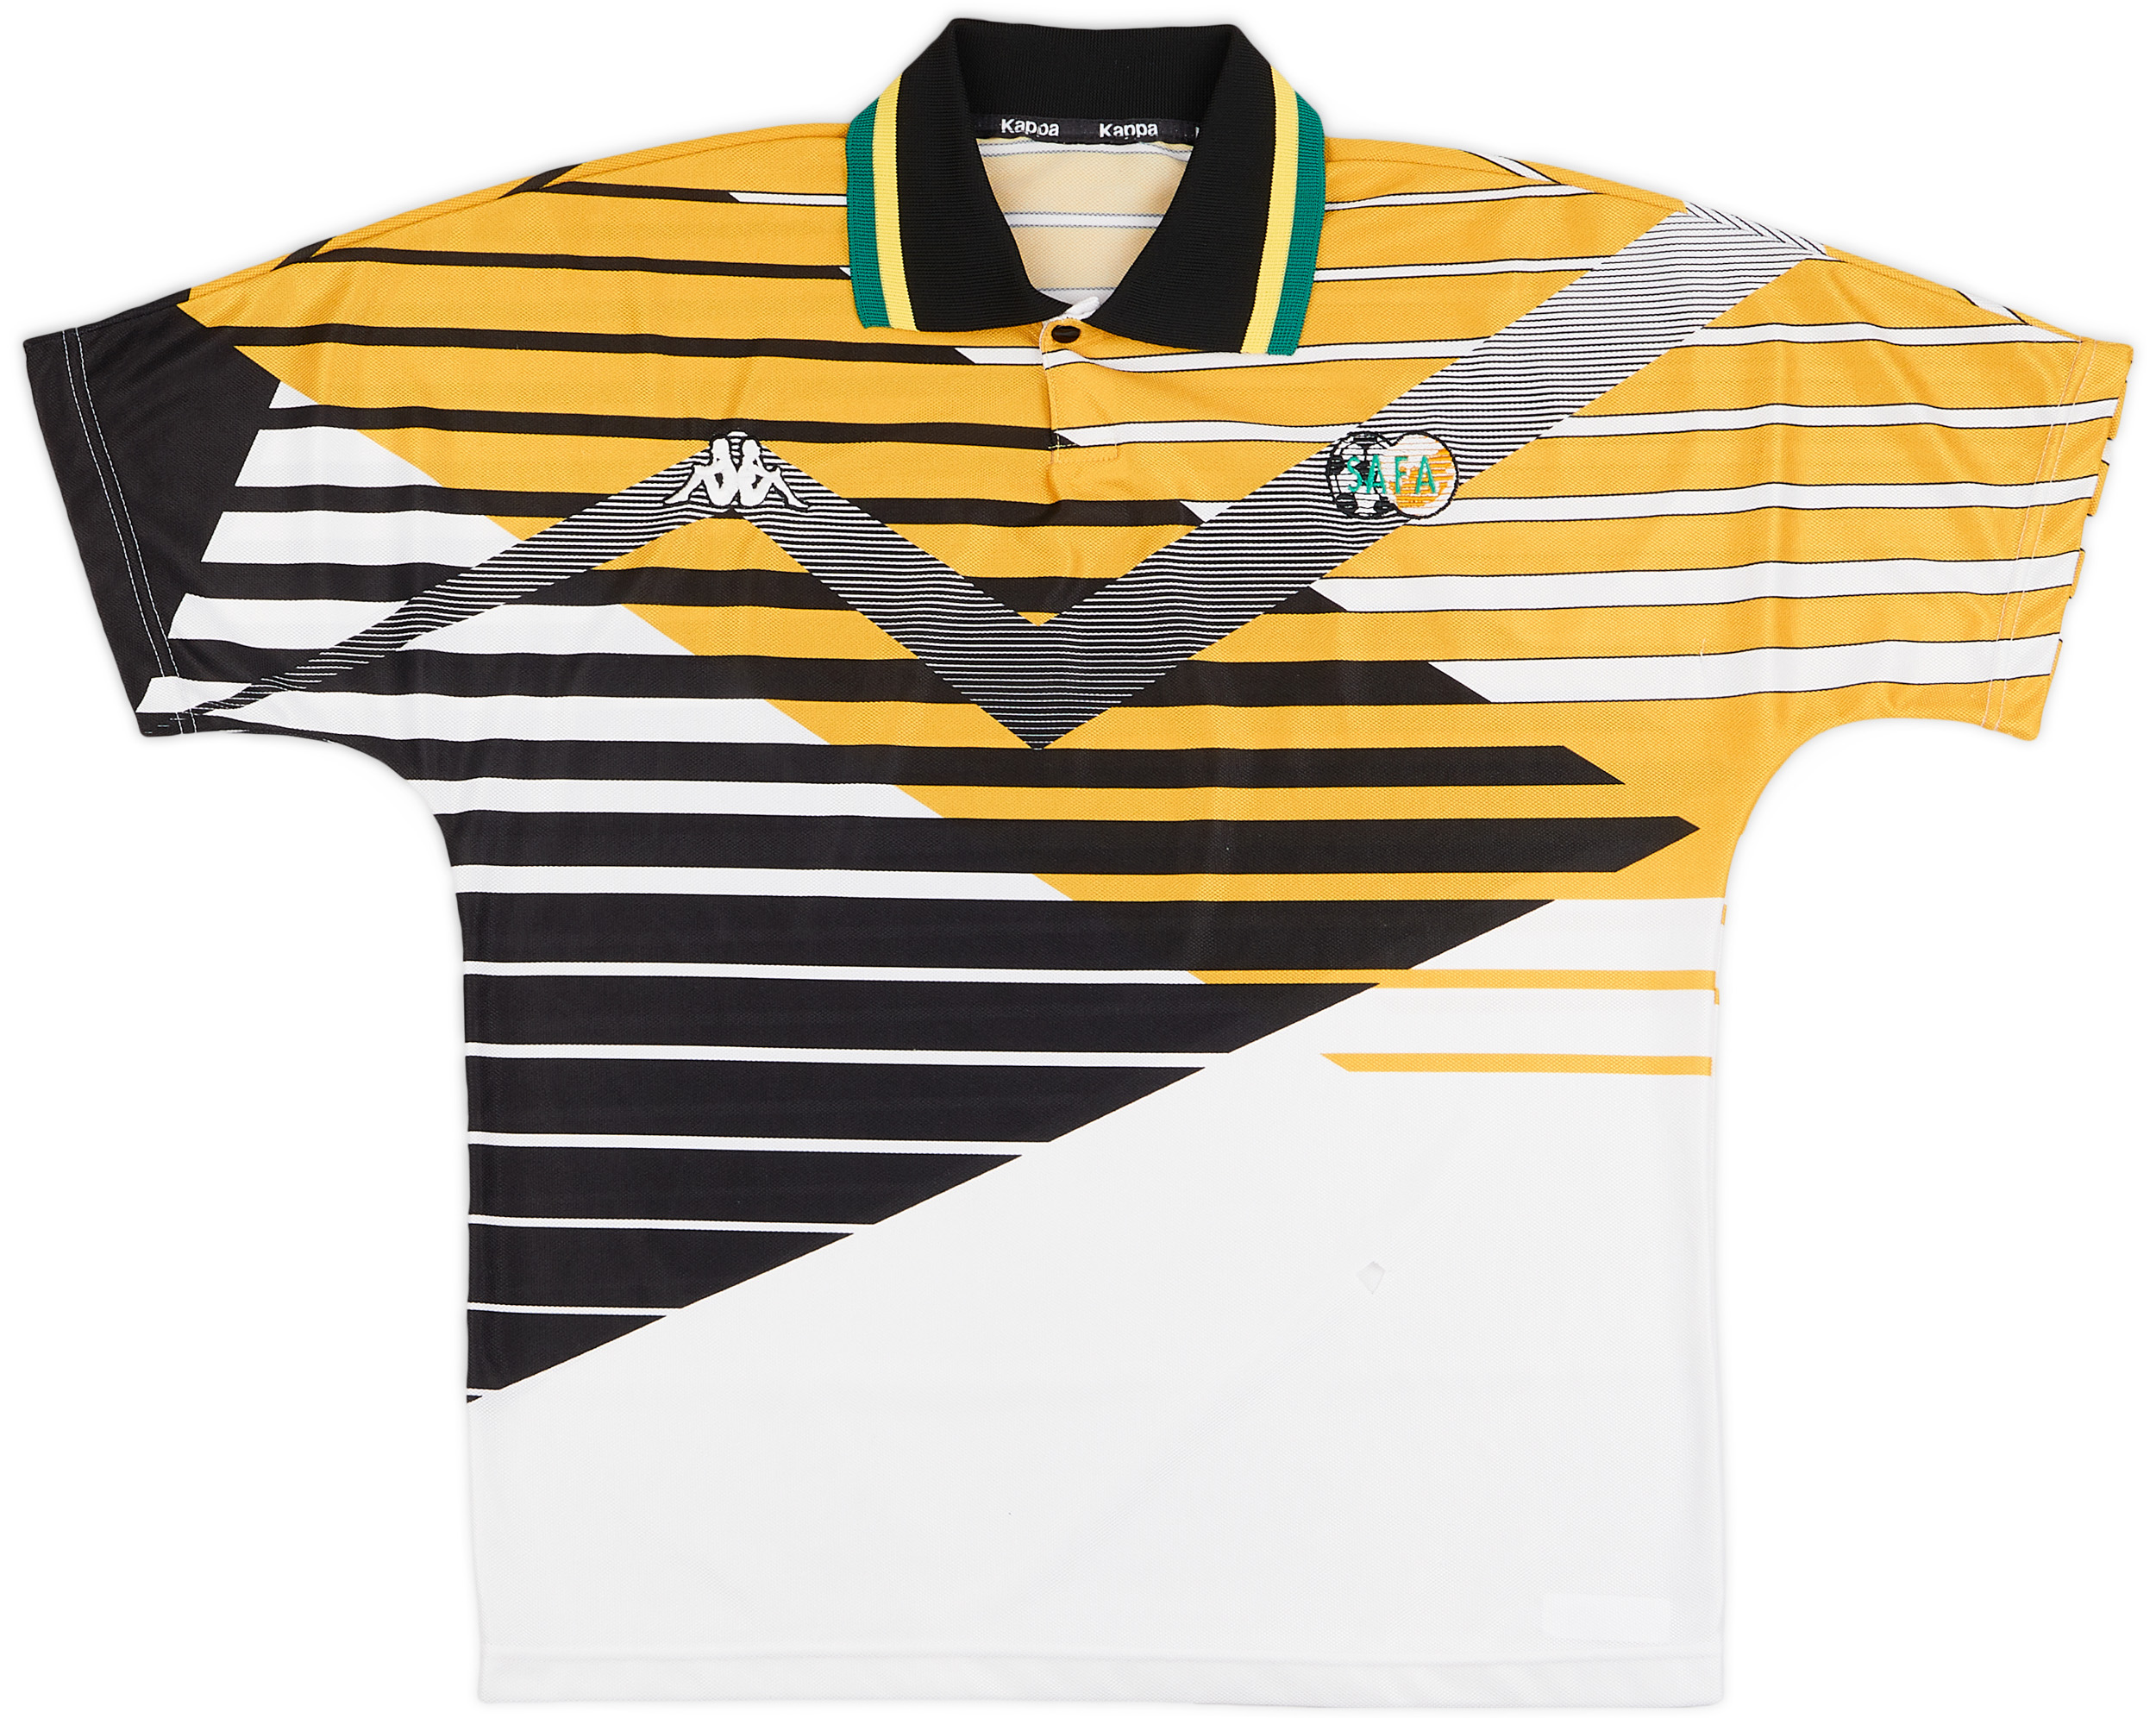 1996-98 South Africa Home Shirt - 5/10 - ()